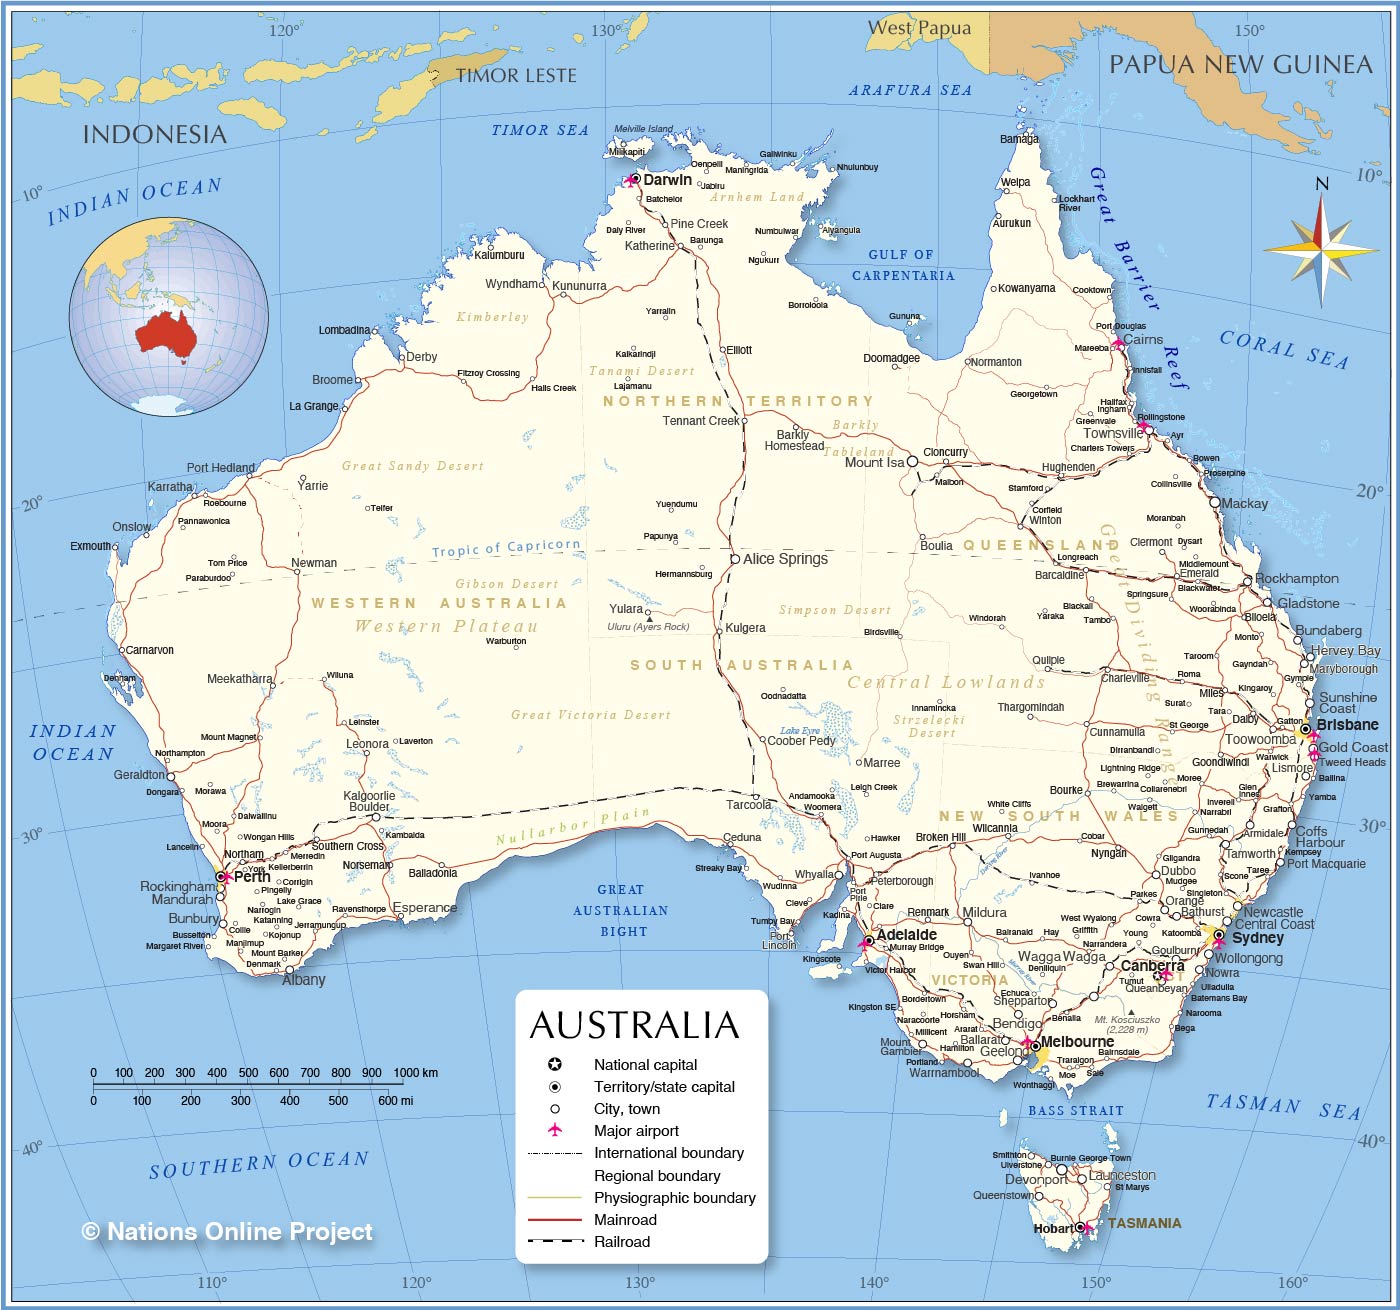 Detailed Map of Australia - Nations Online Project